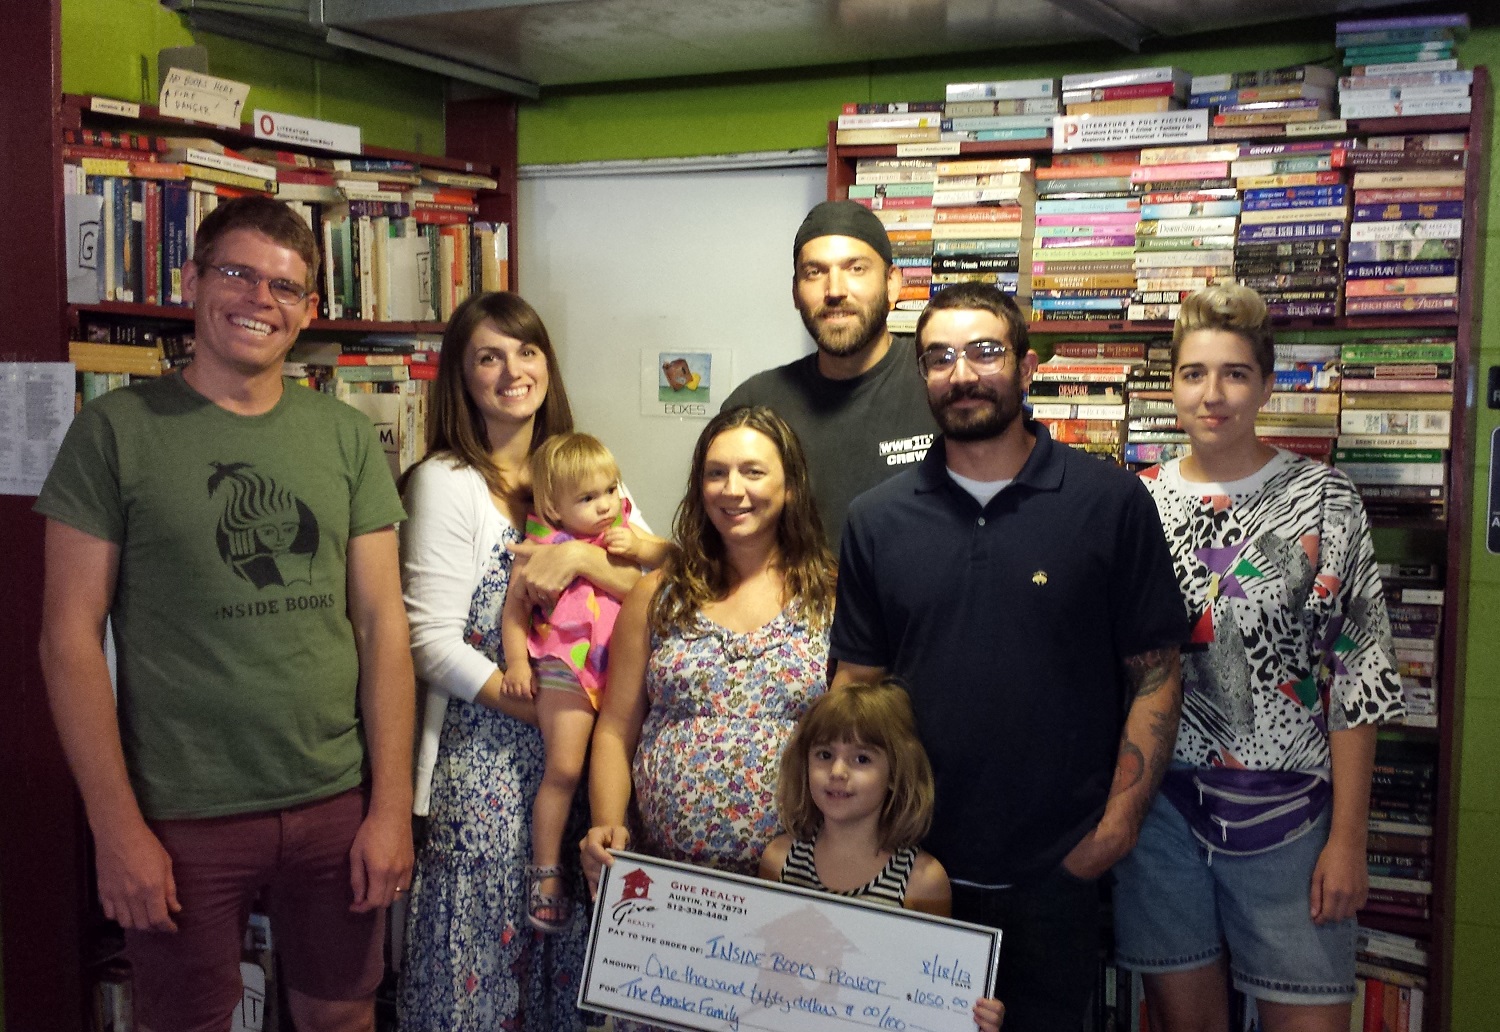 $1,050.00 Donated to Inside Books Project on Behalf of Javier and Joanna Gonzalez